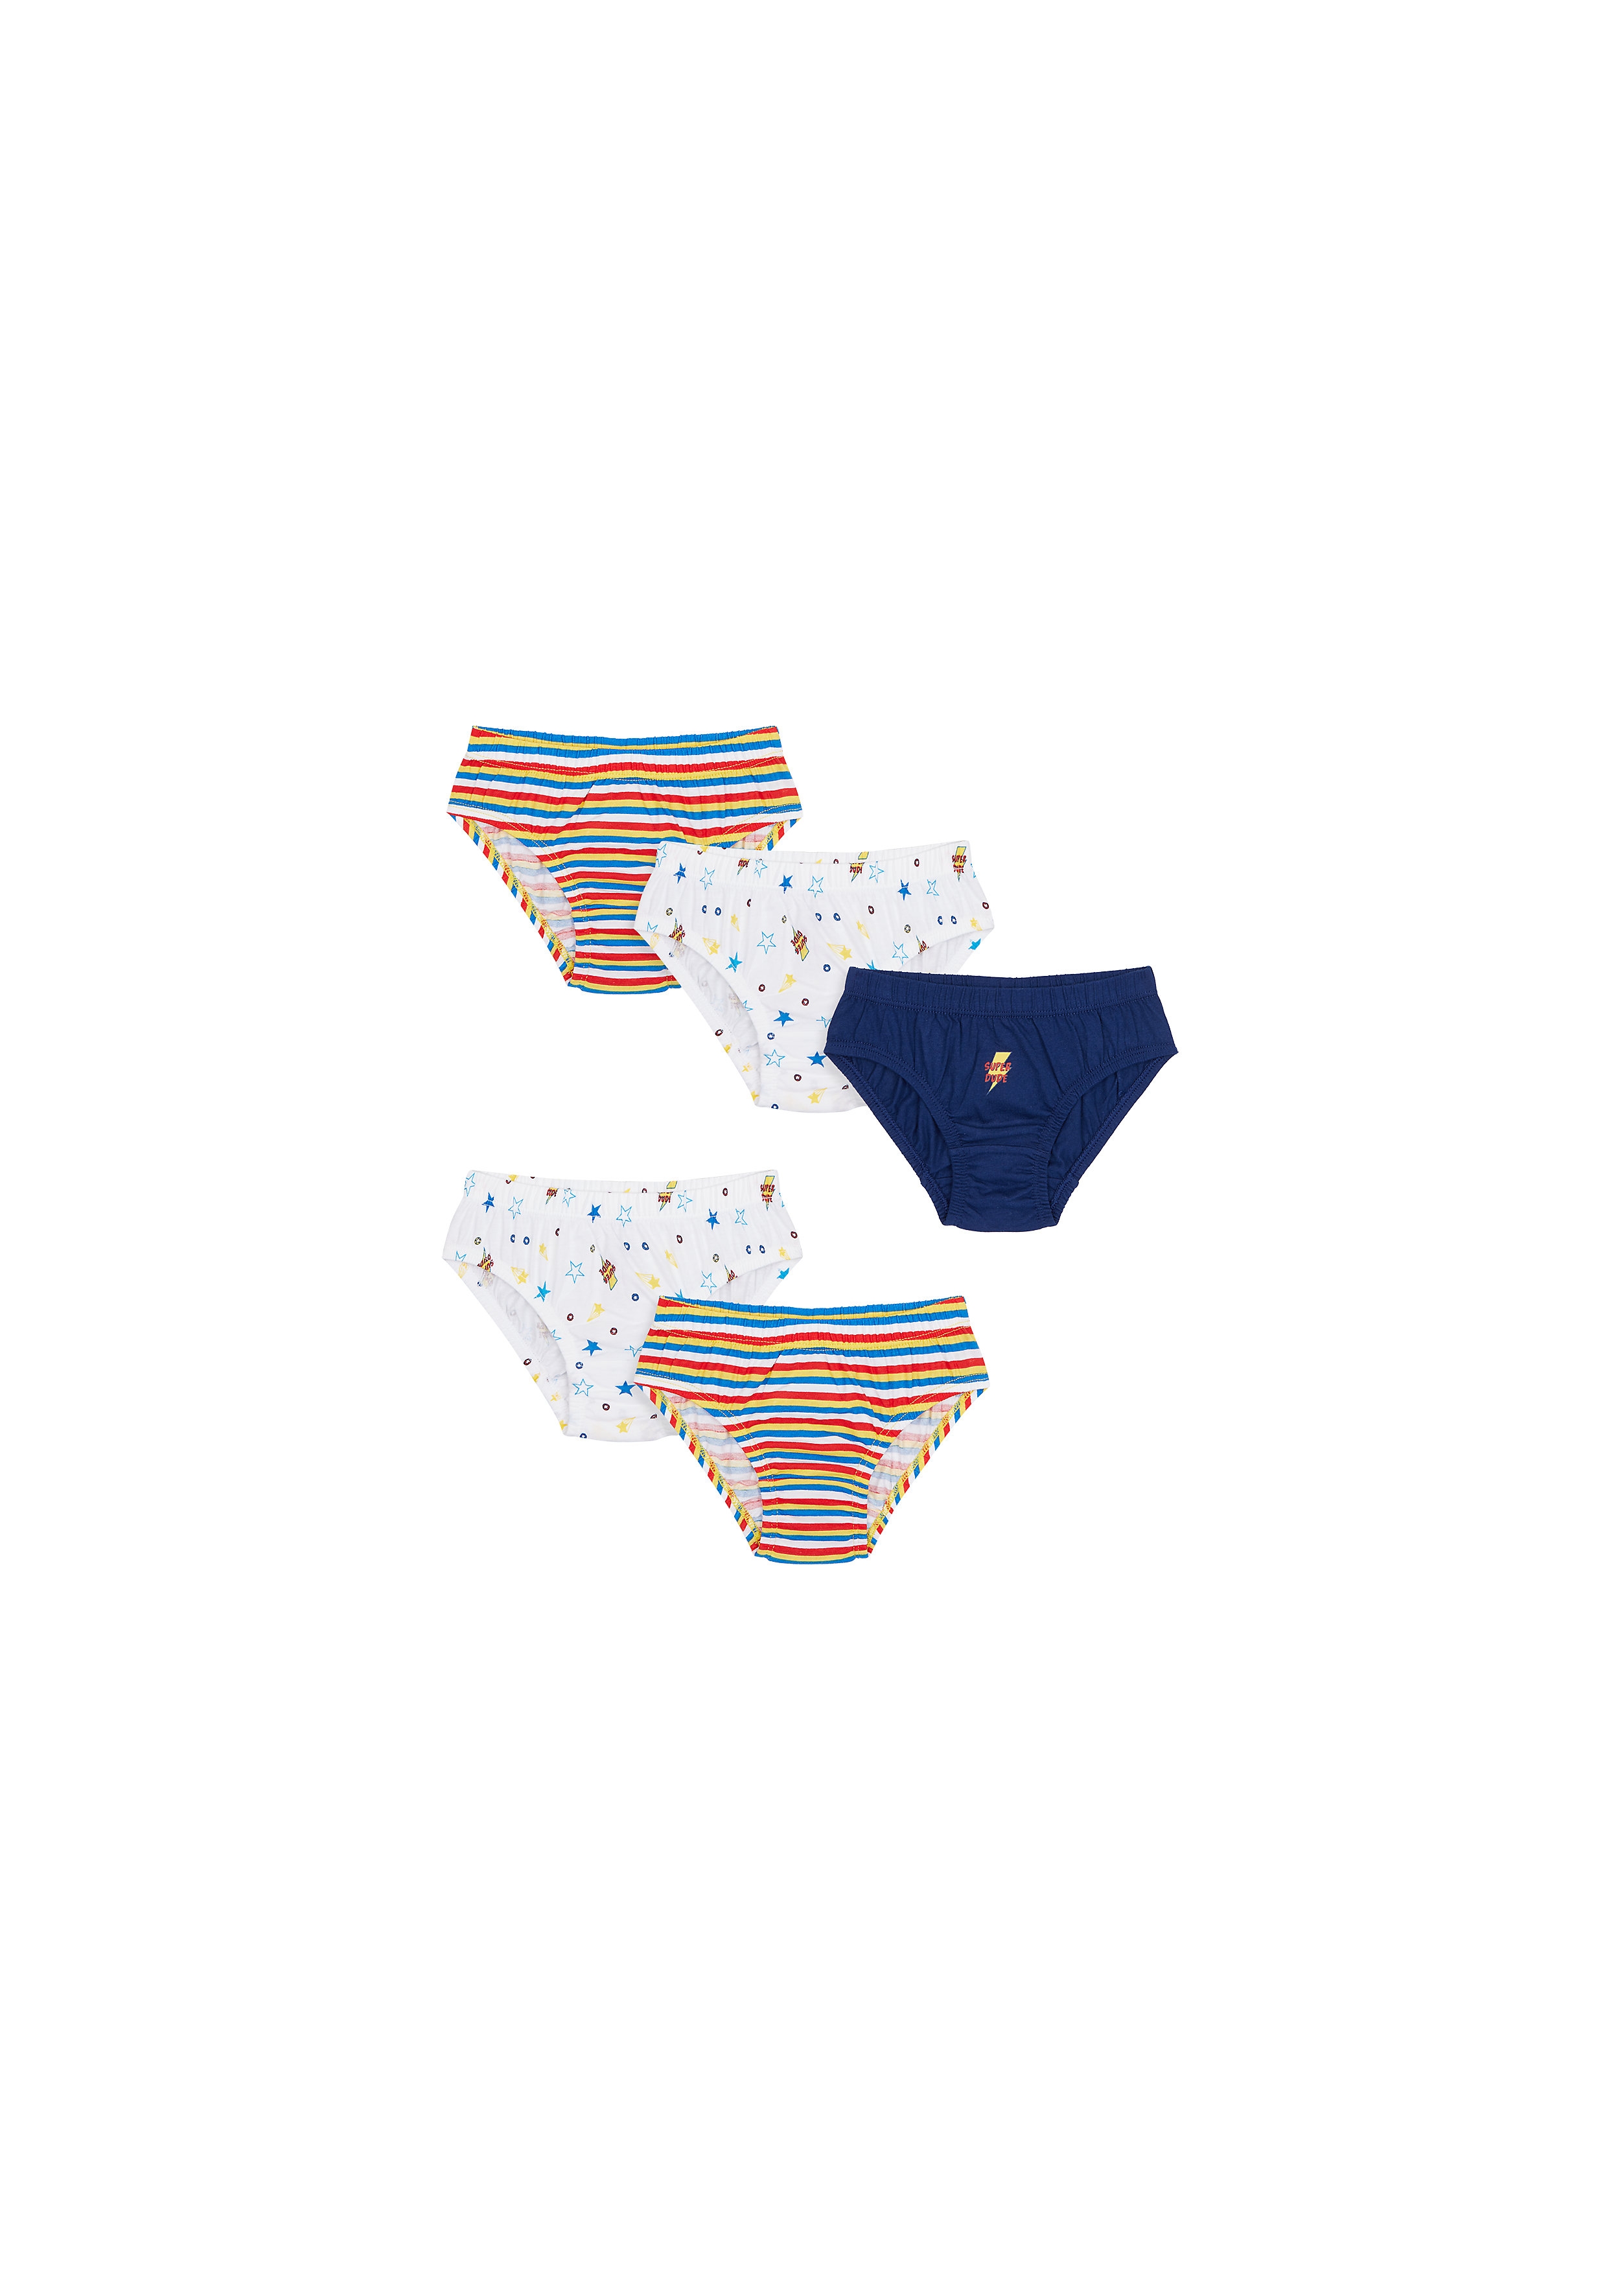 Boys Briefs Striped And Printed - Pack Of 5 - Multicolor